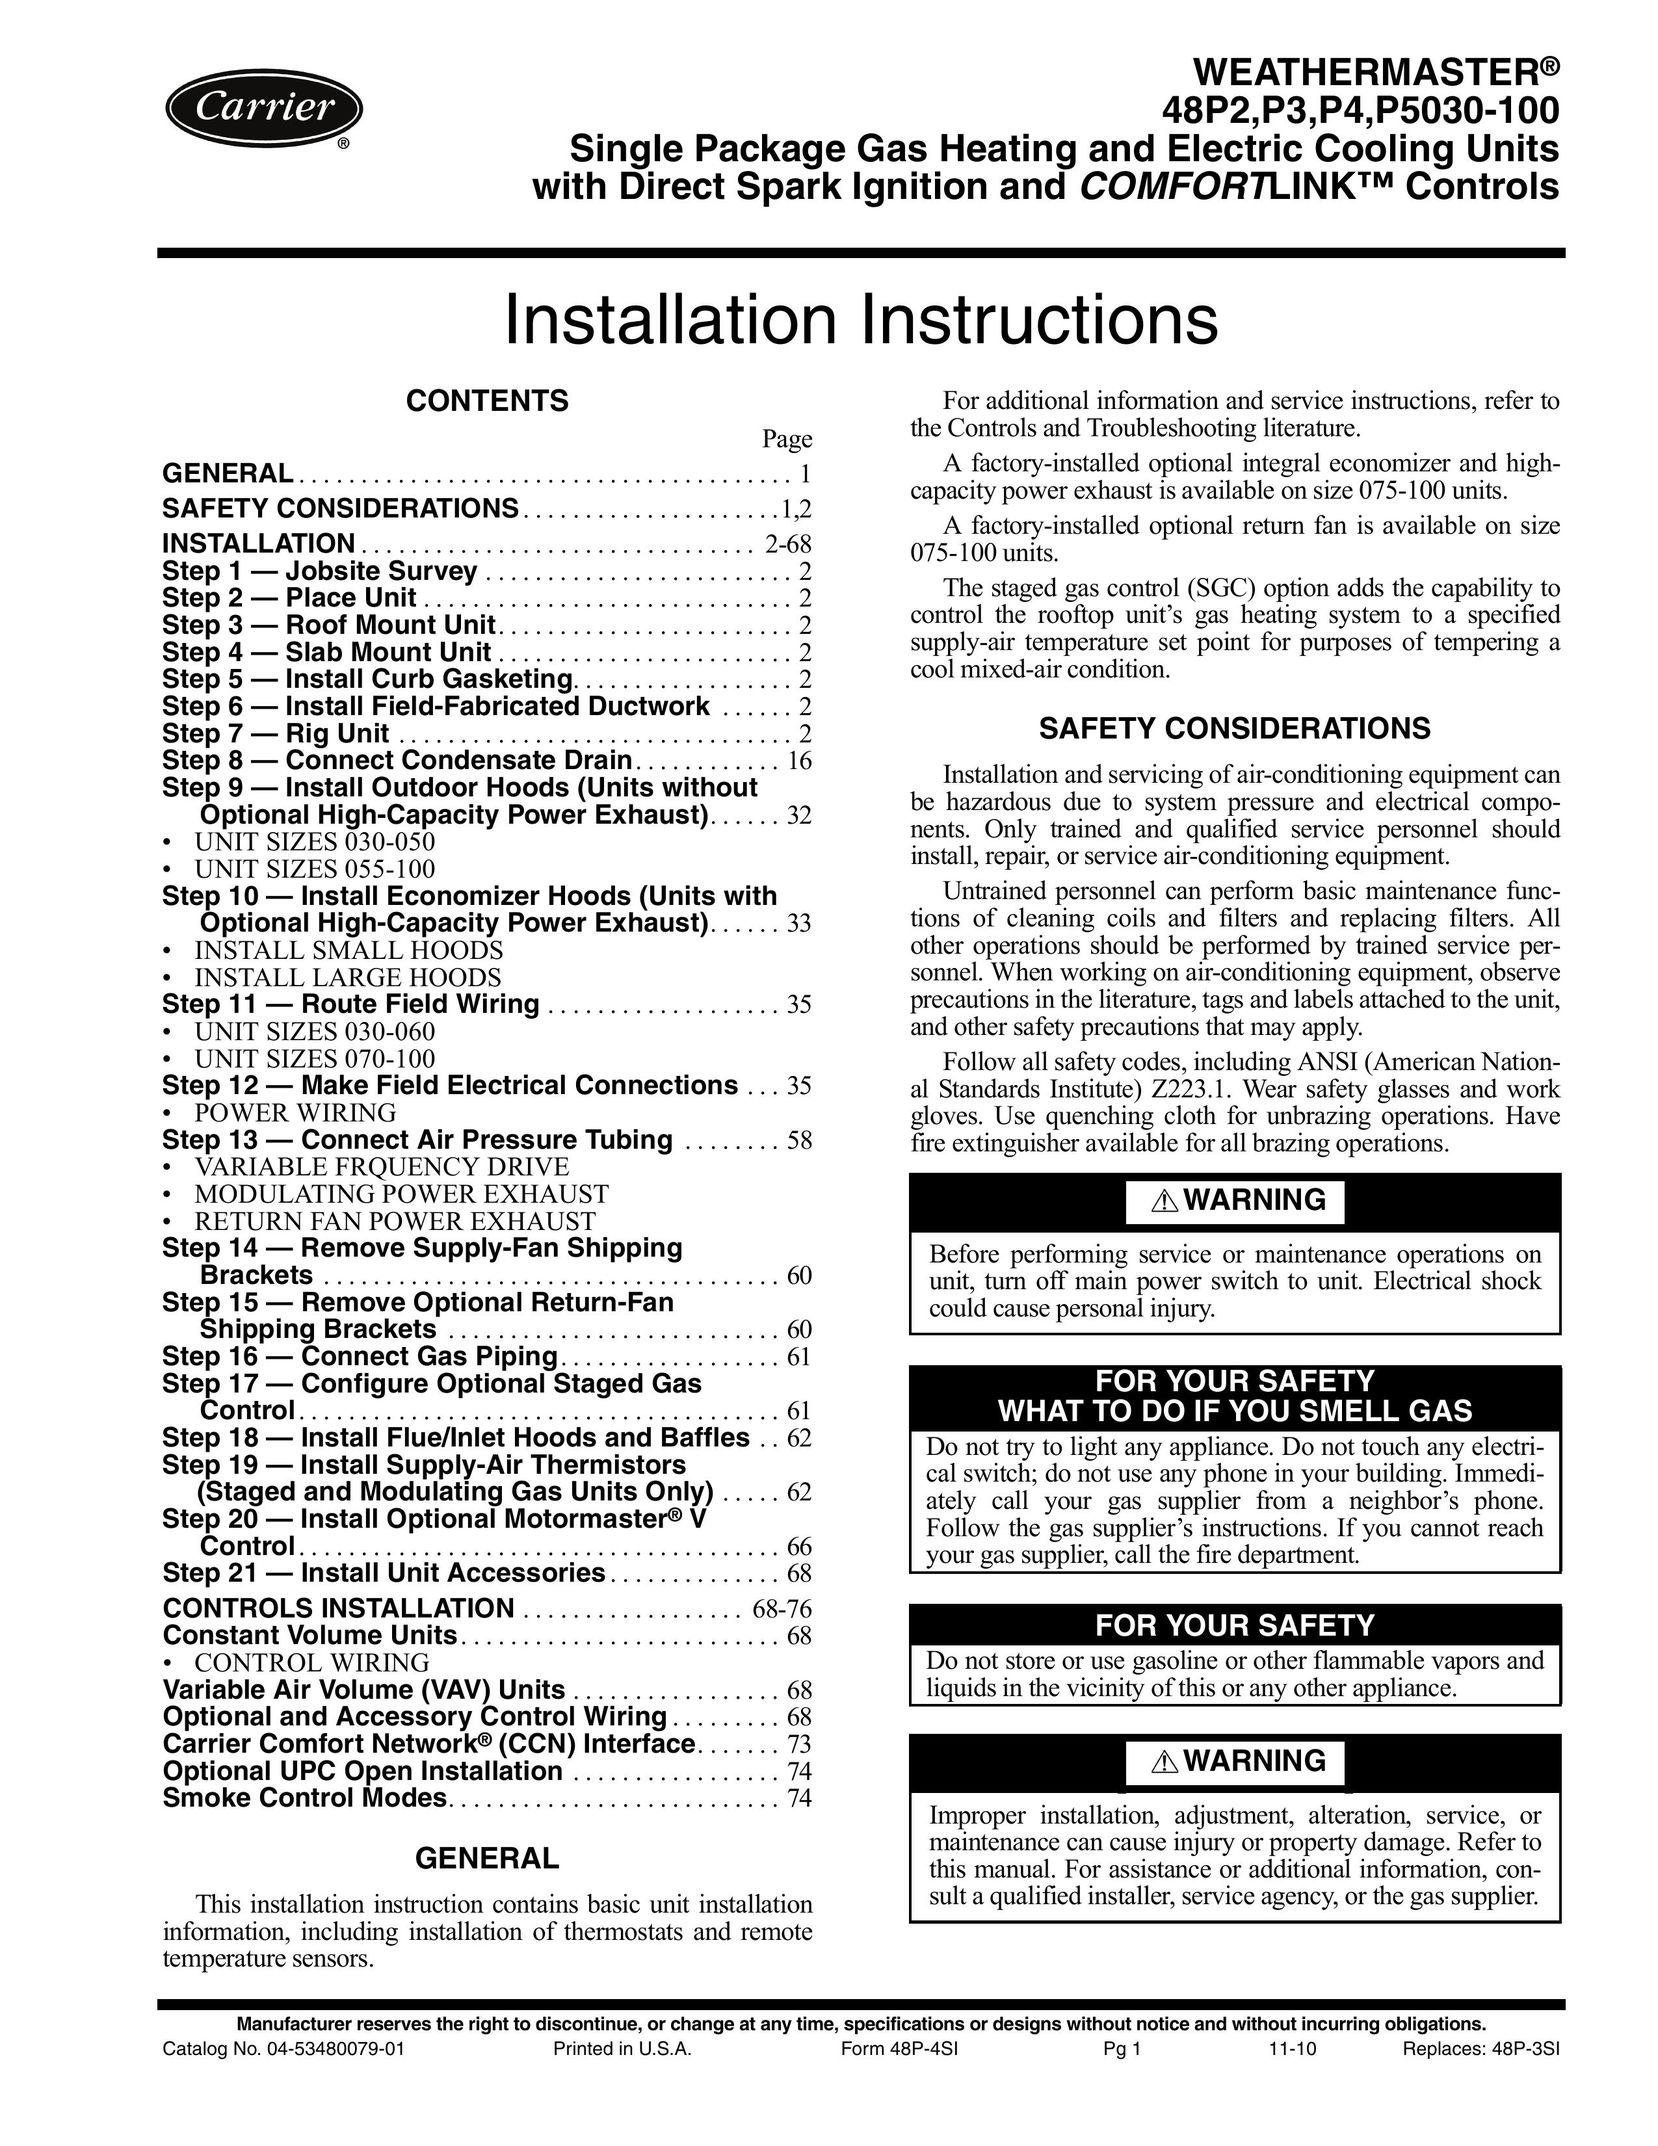 Carrier P4 Electric Heater User Manual